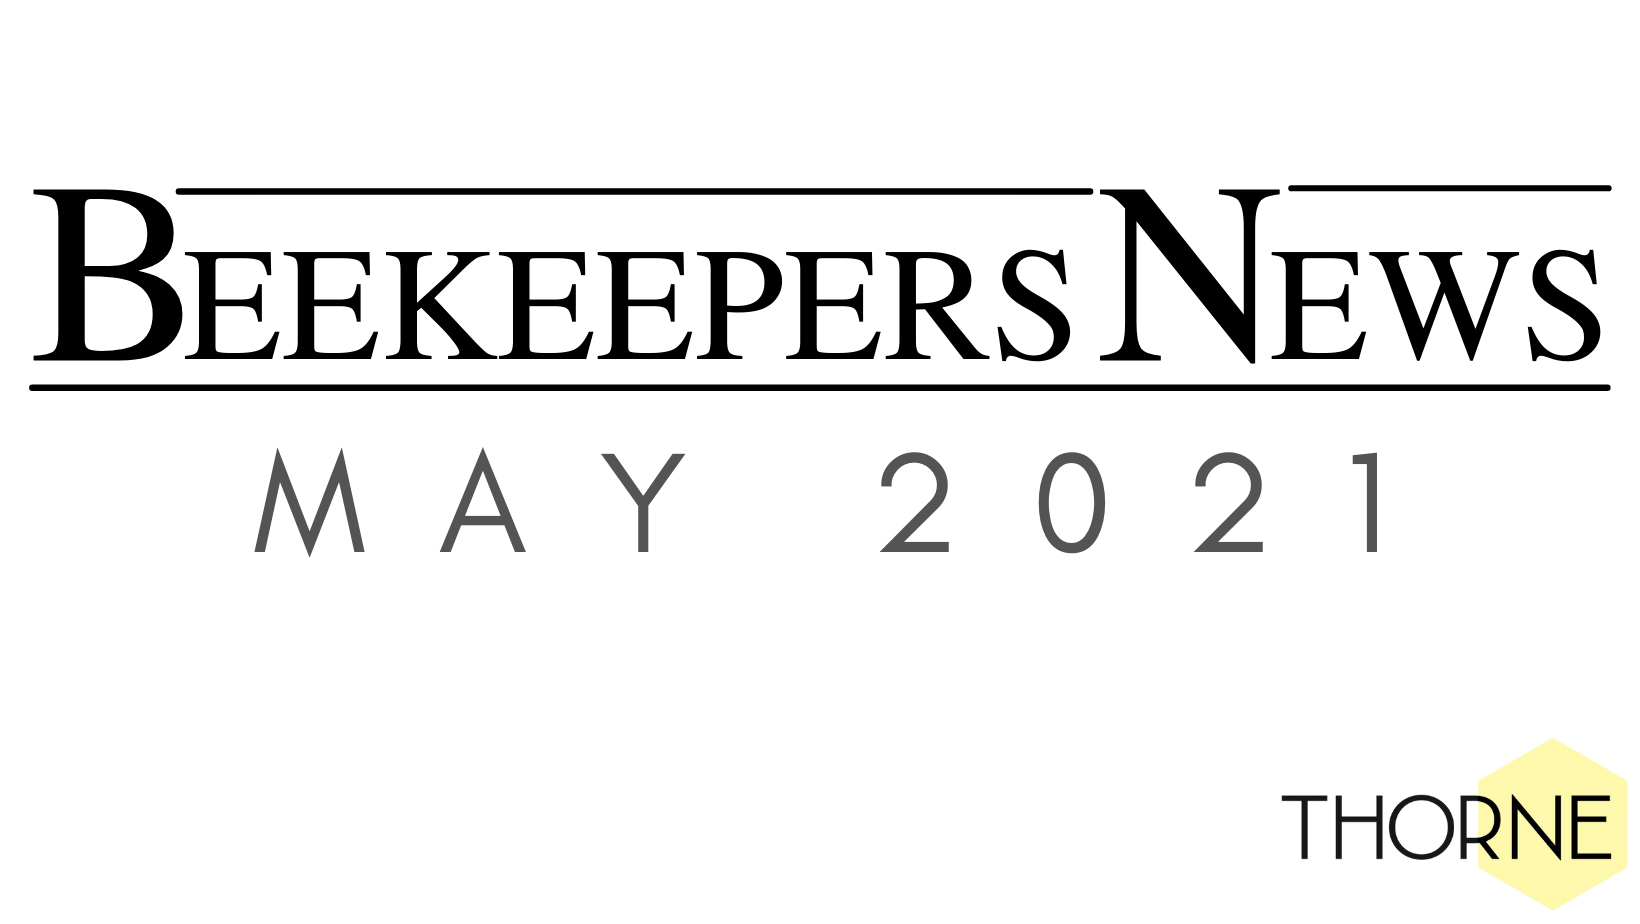 Beekeepers News - May 2021 - Issue 56